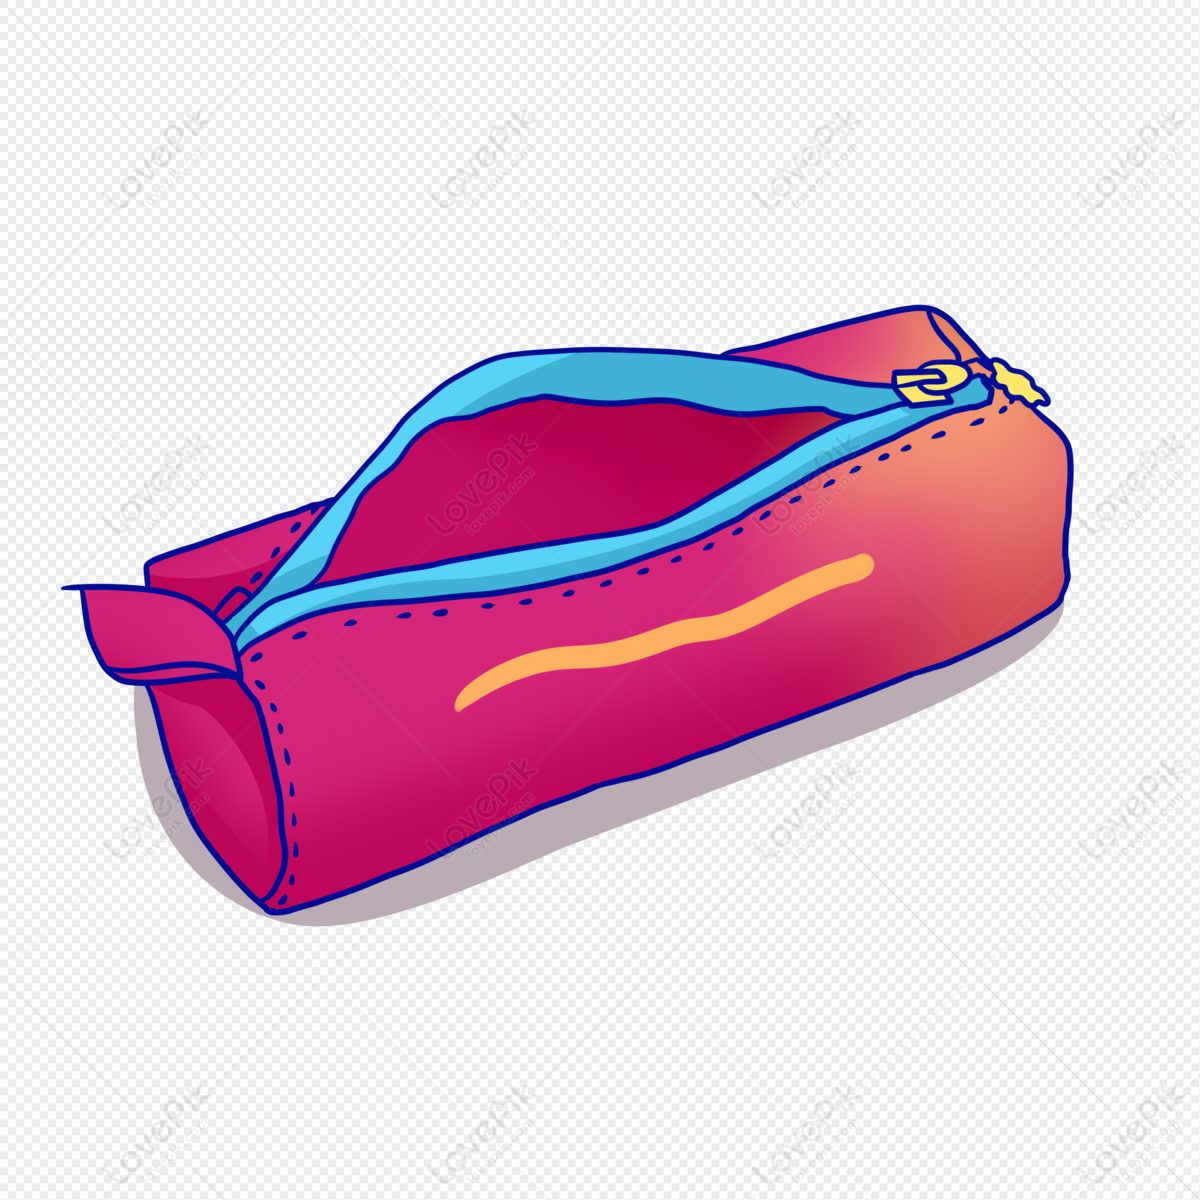 Open Pencil Case With Zipper Full Of Stationery Stock Illustration